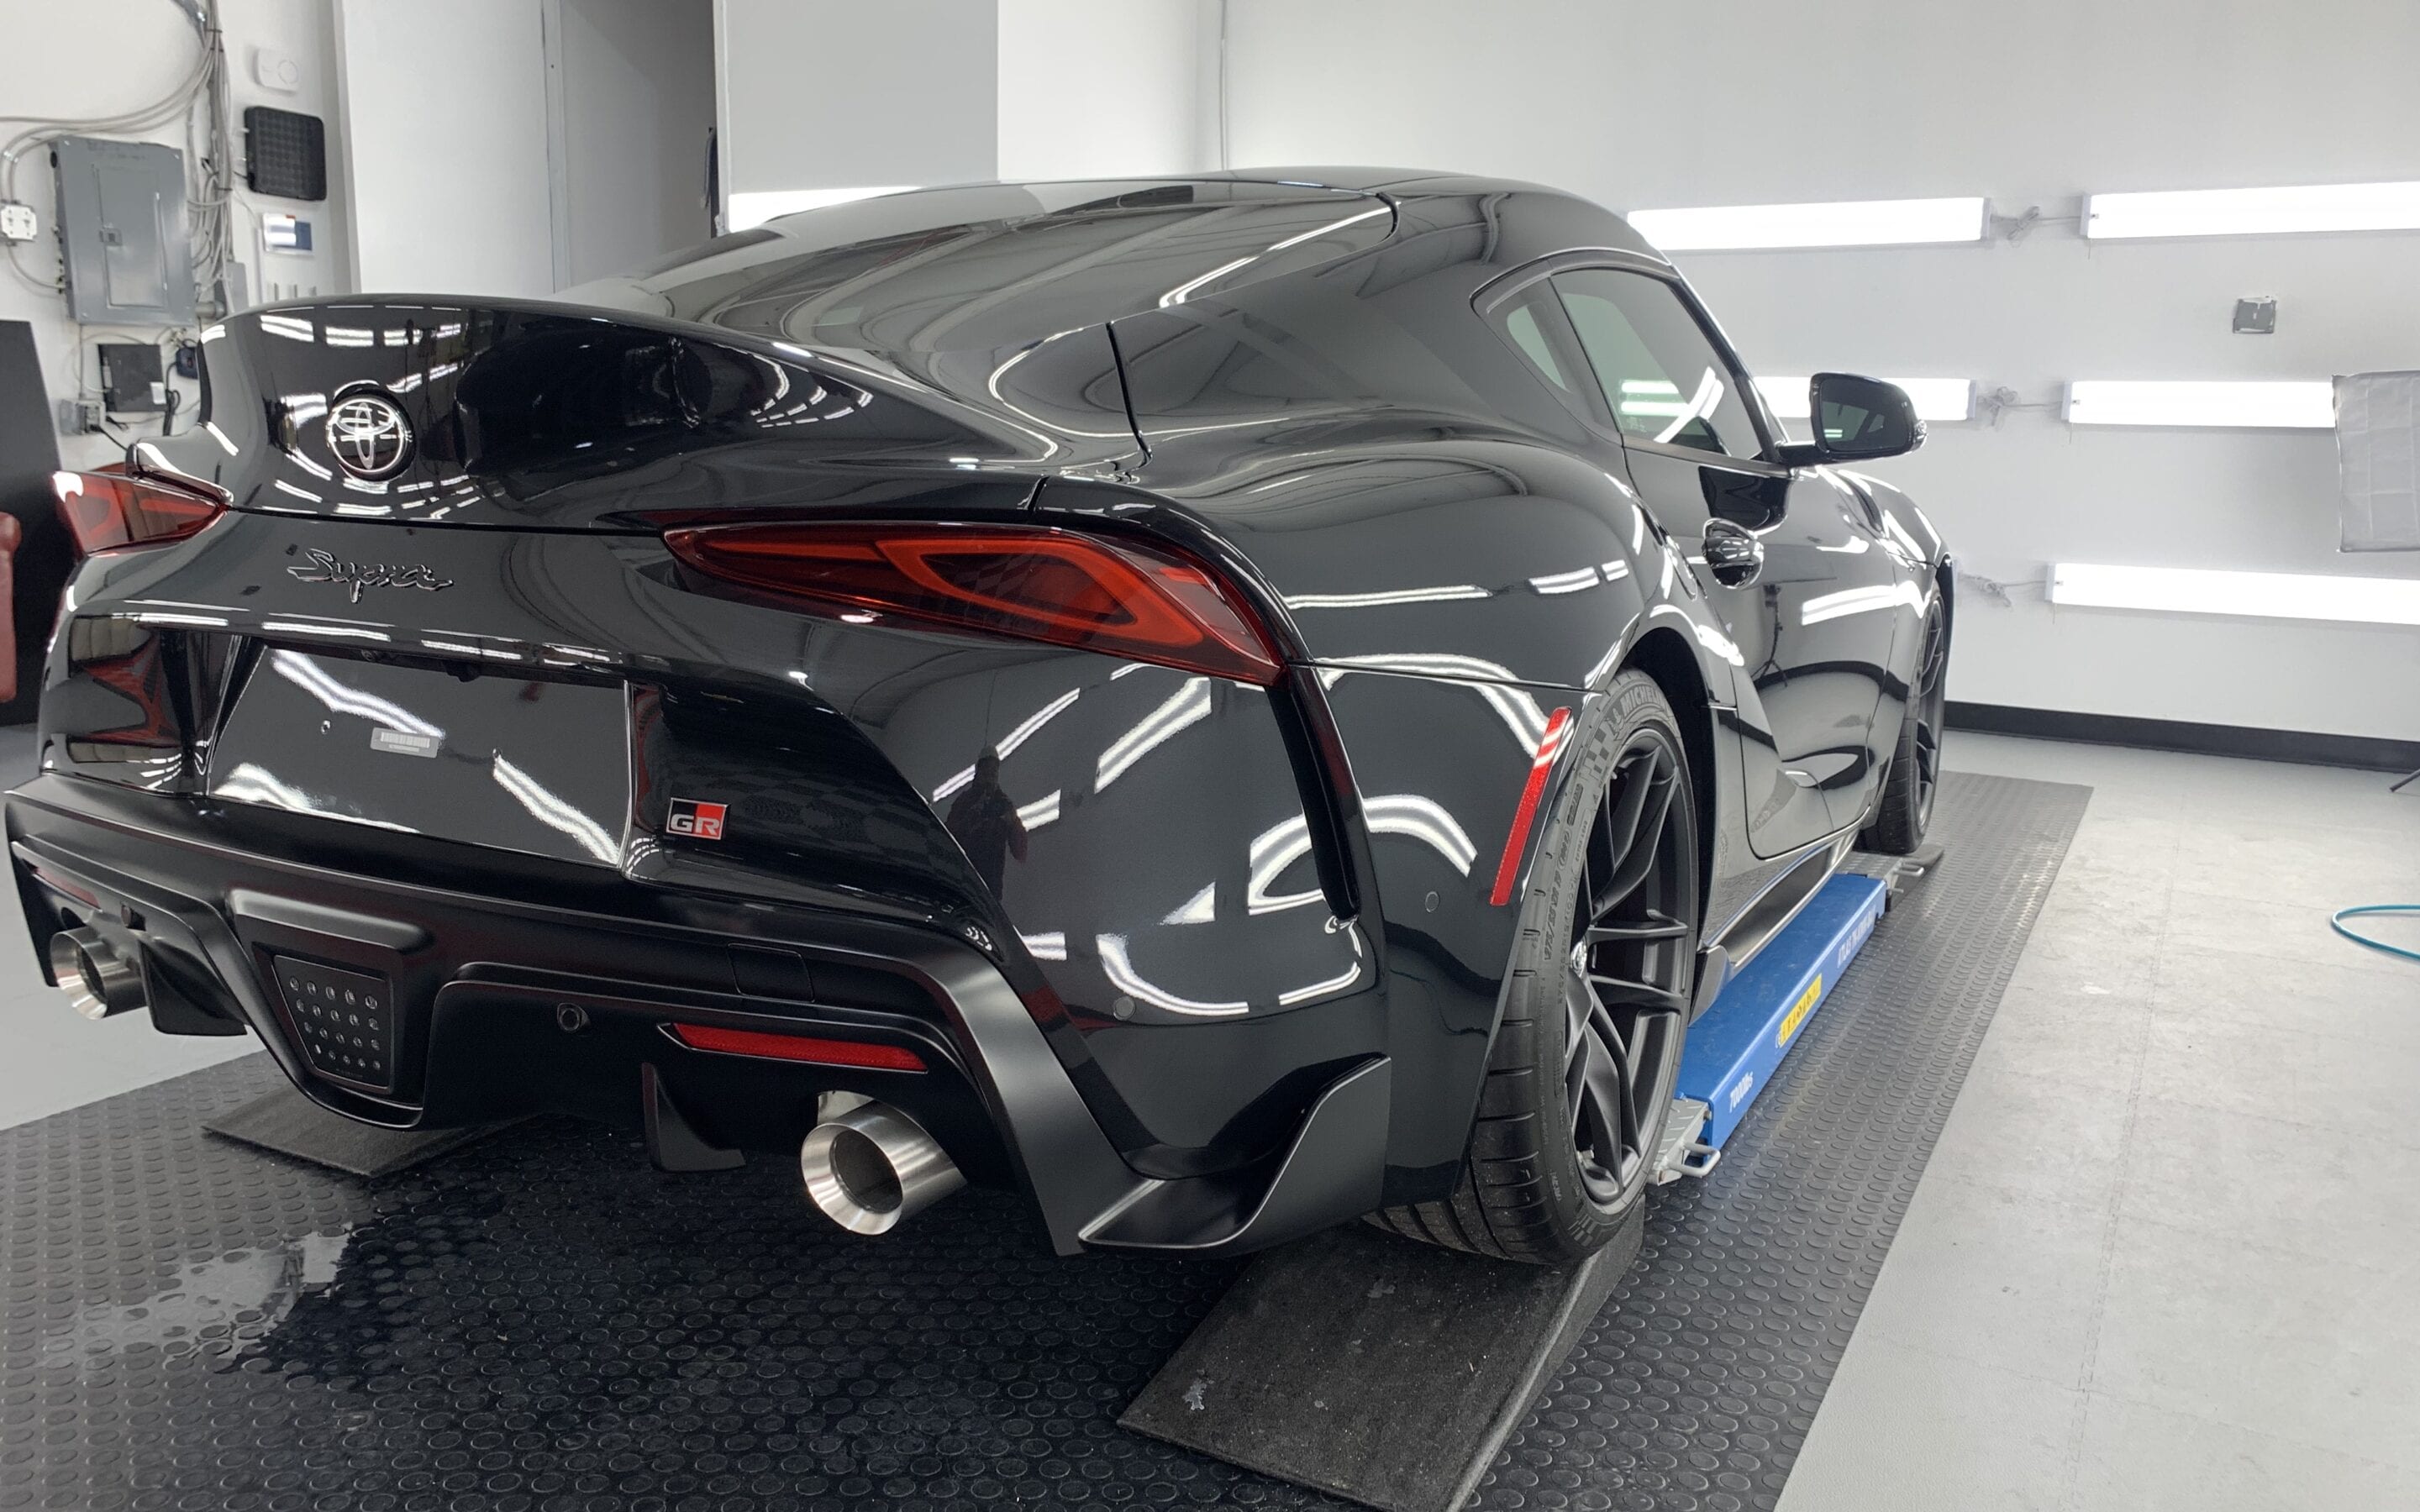 Photo of a Simple Wash of a 2020 Toyota Supra